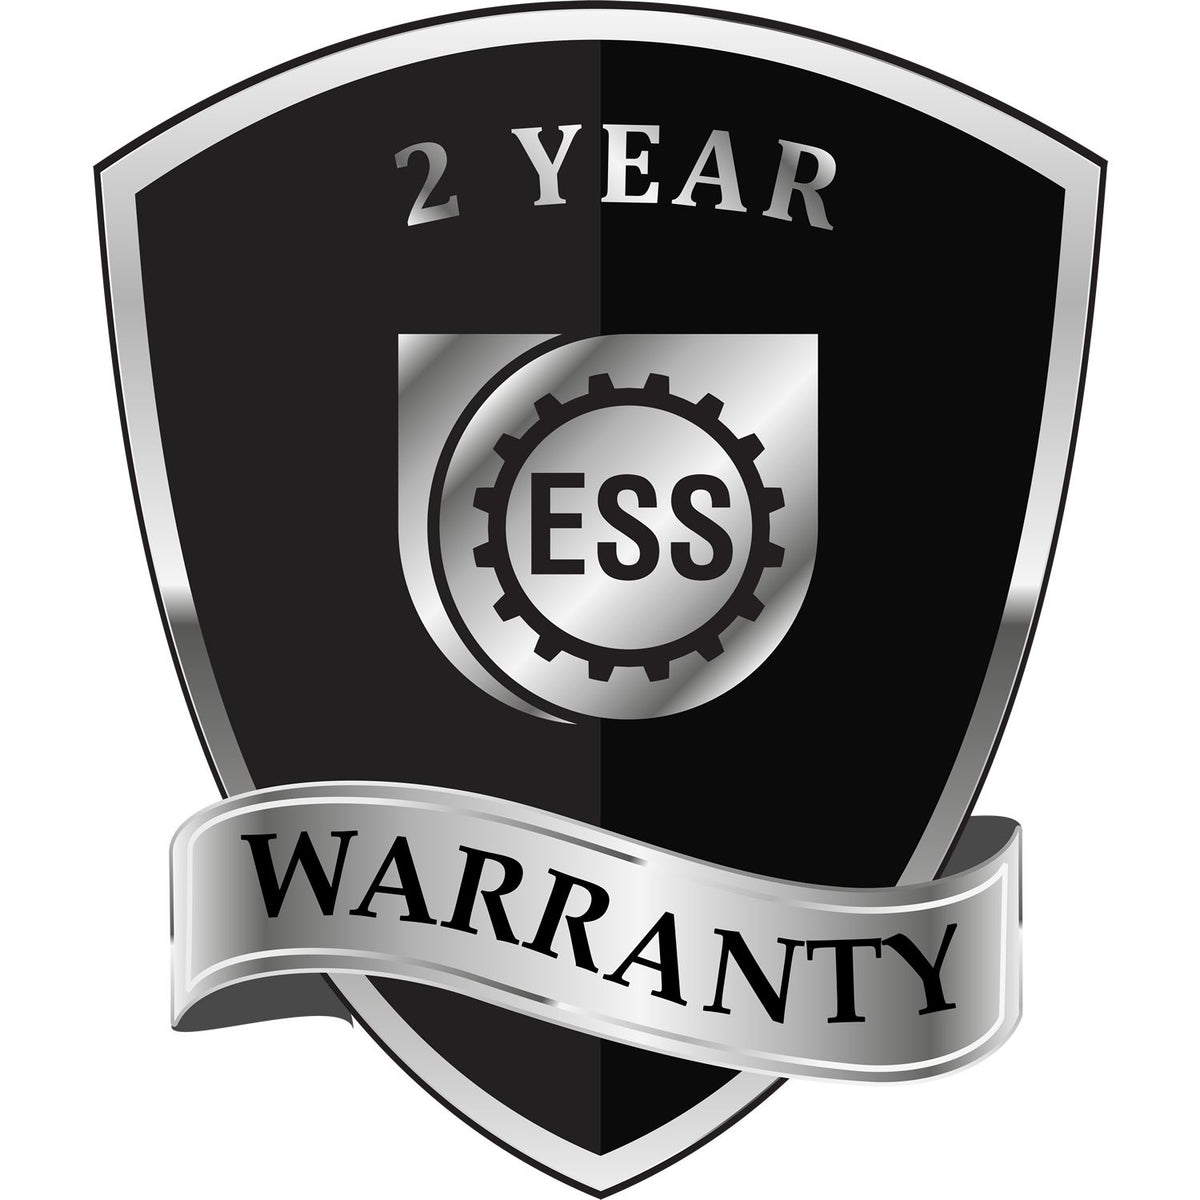 A black and silver badge or emblem showing warranty information for the Wisconsin Geologist Desk Seal